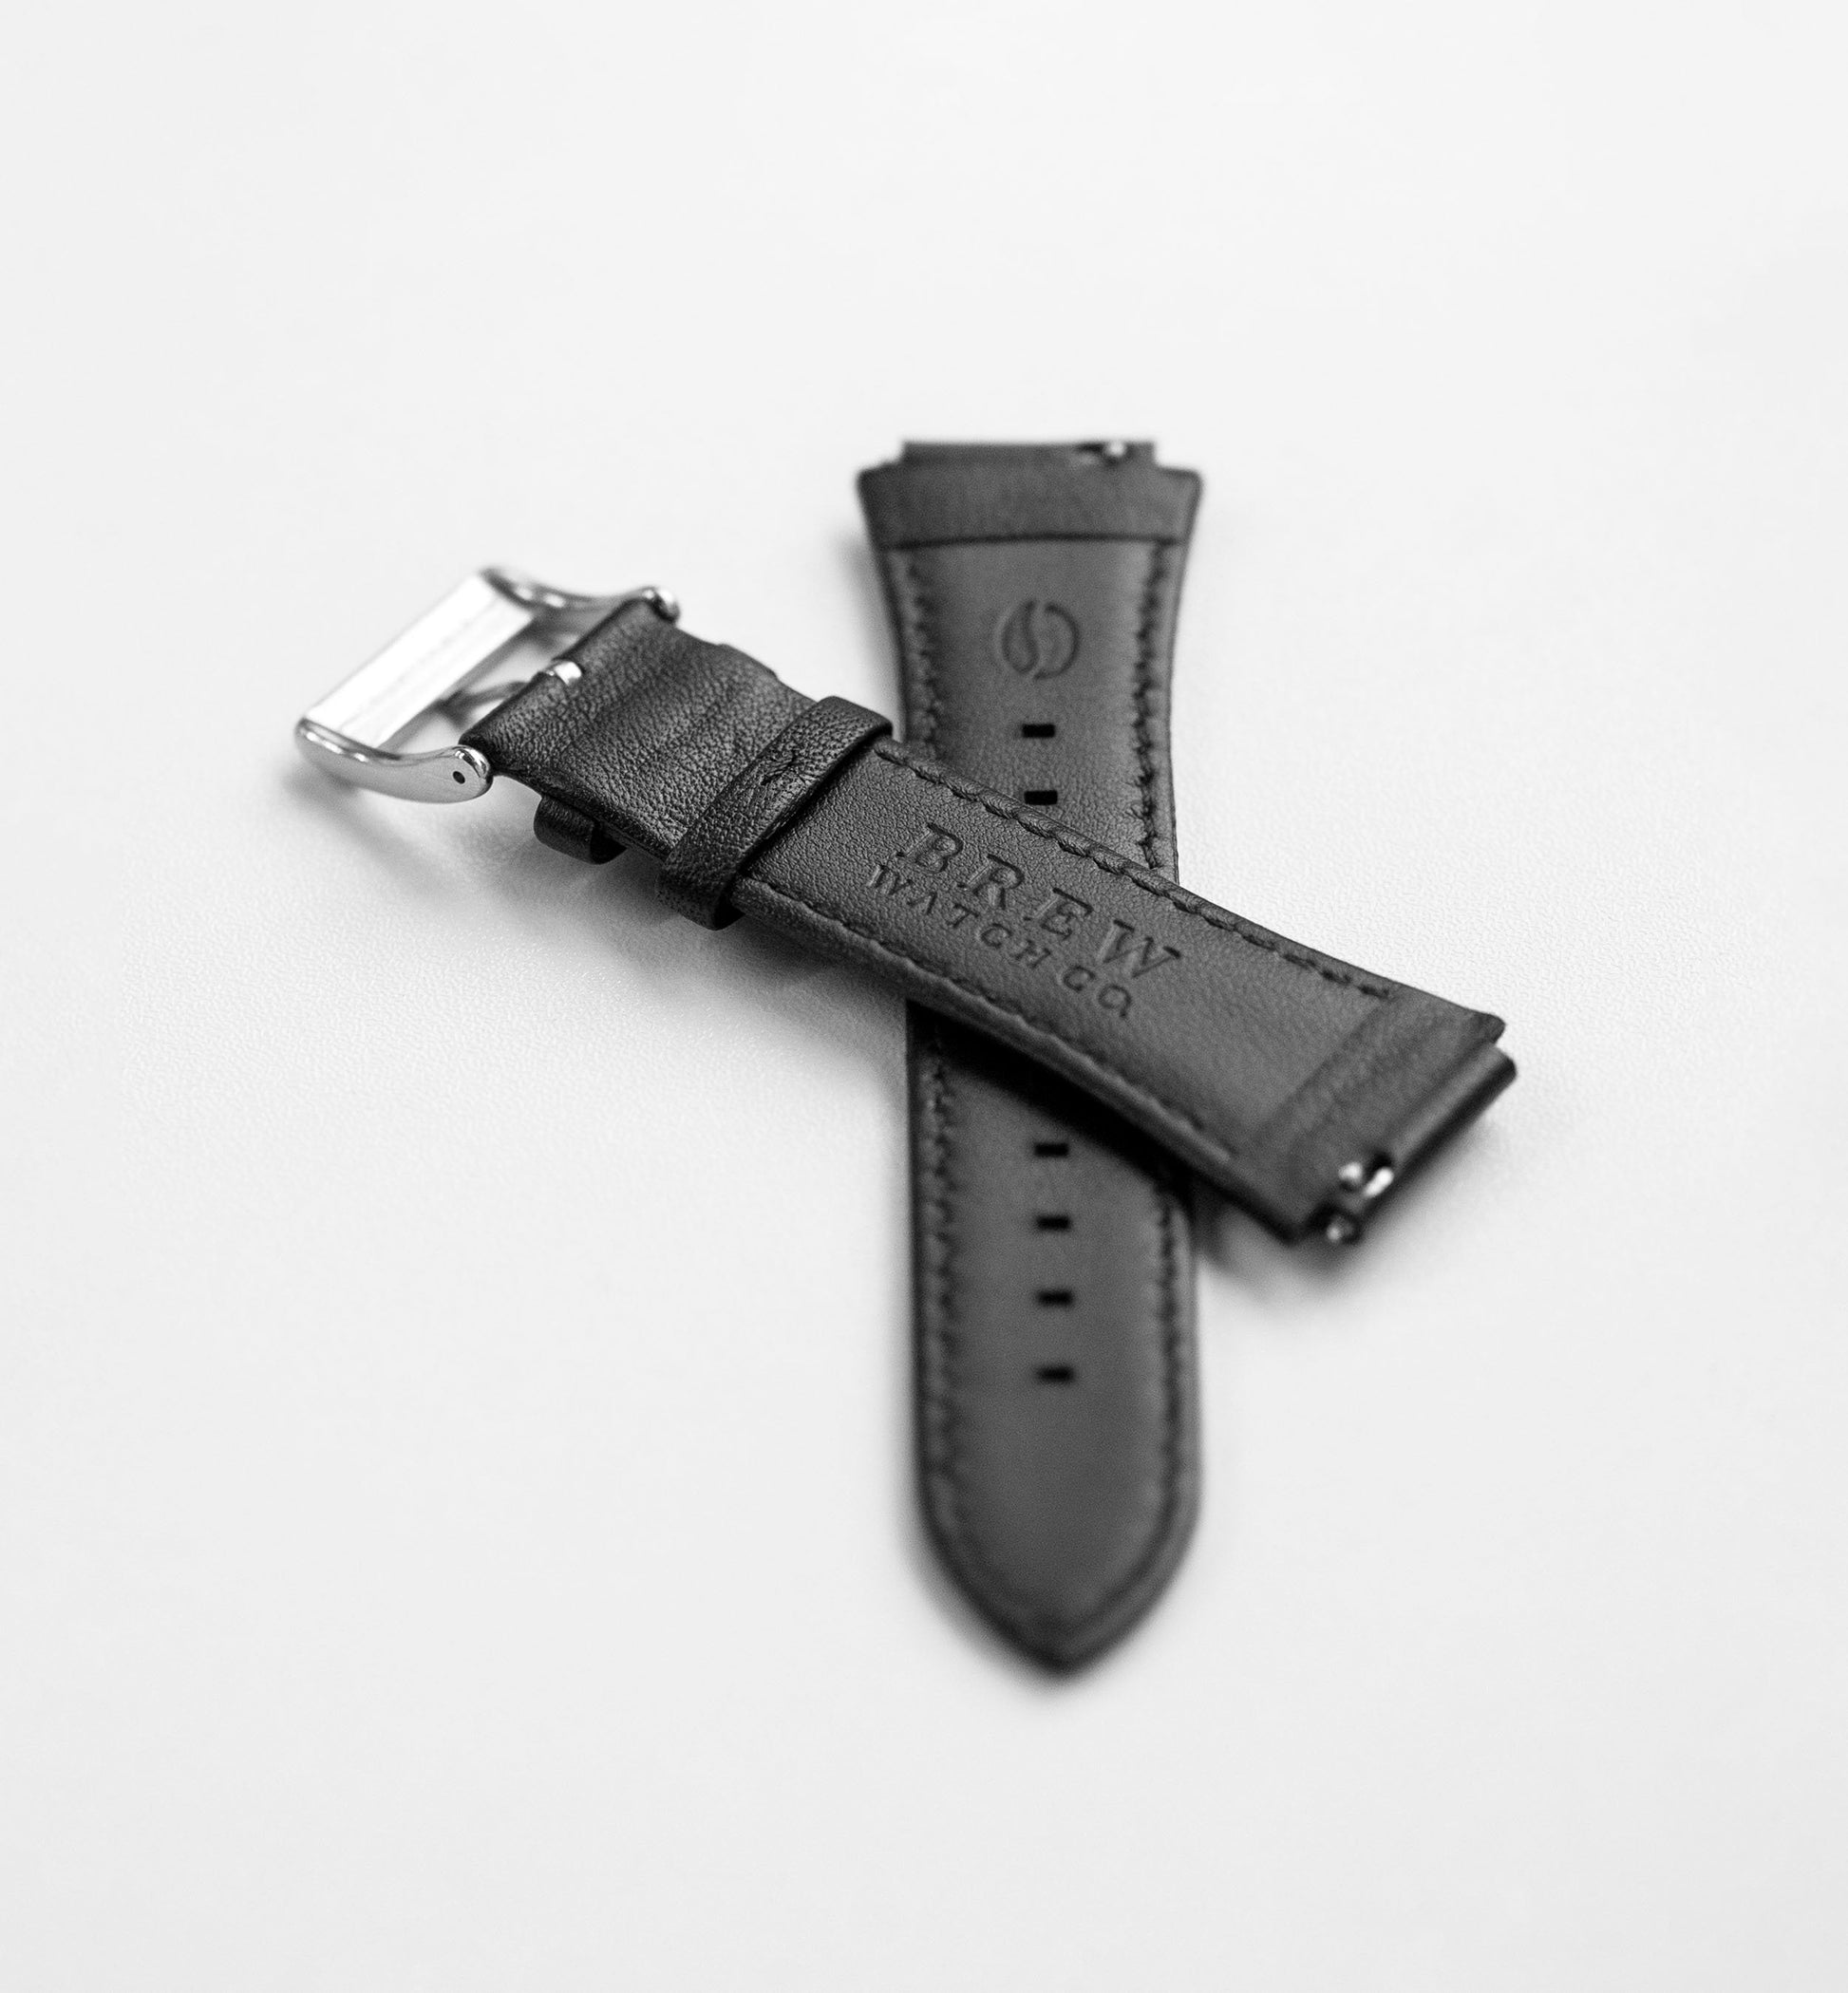 Metric Leather Strap in Black 19.50mm